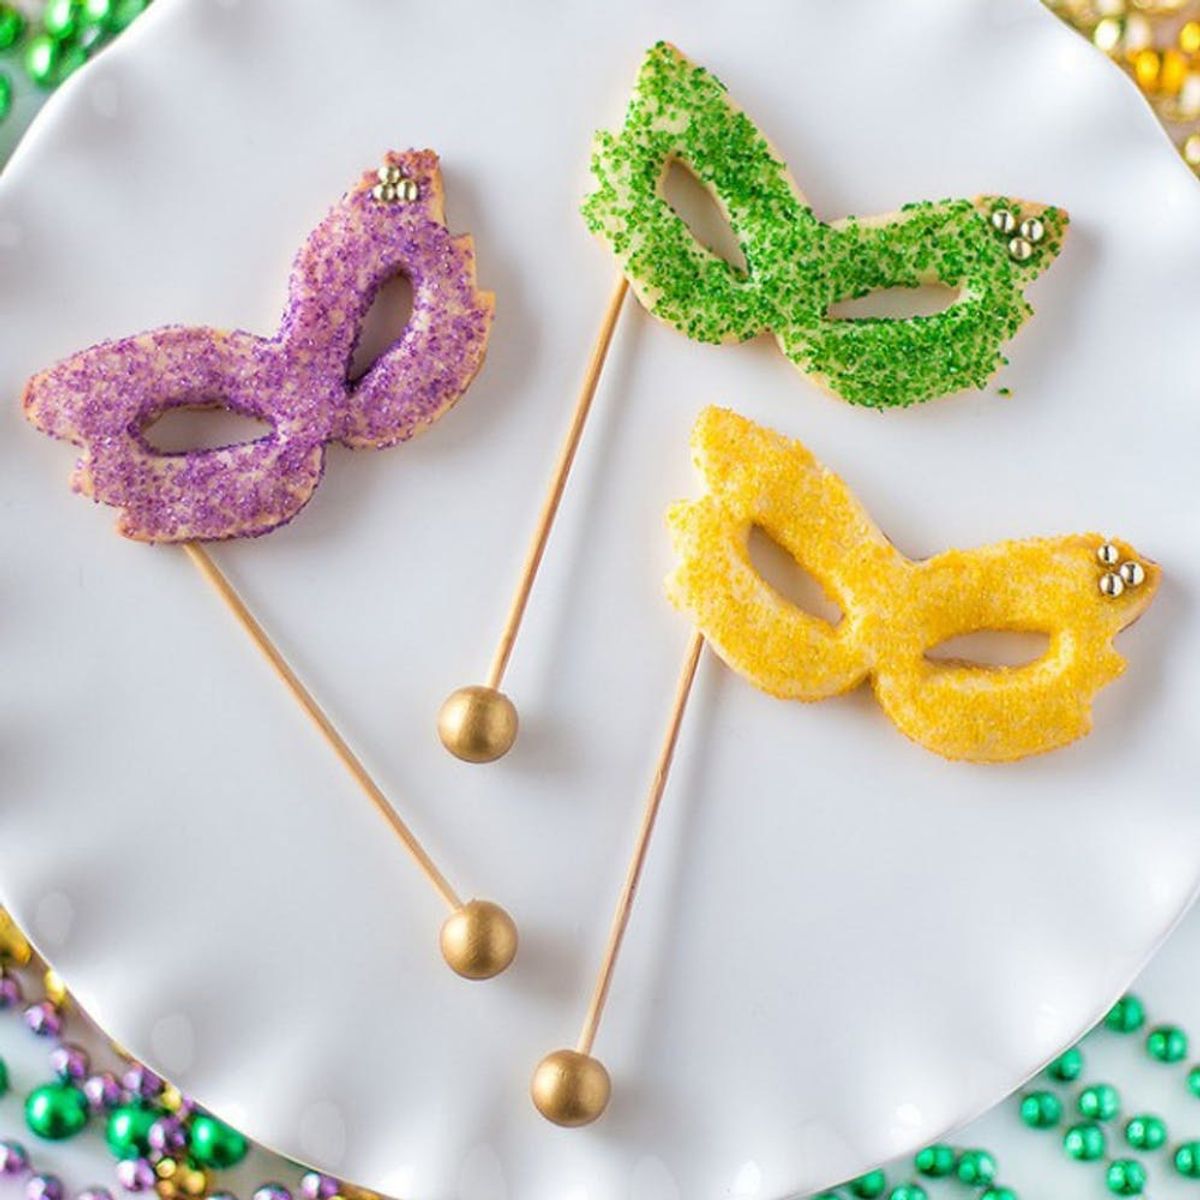 18 Mardi Gras-Inspired Recipes to Get the Party Started